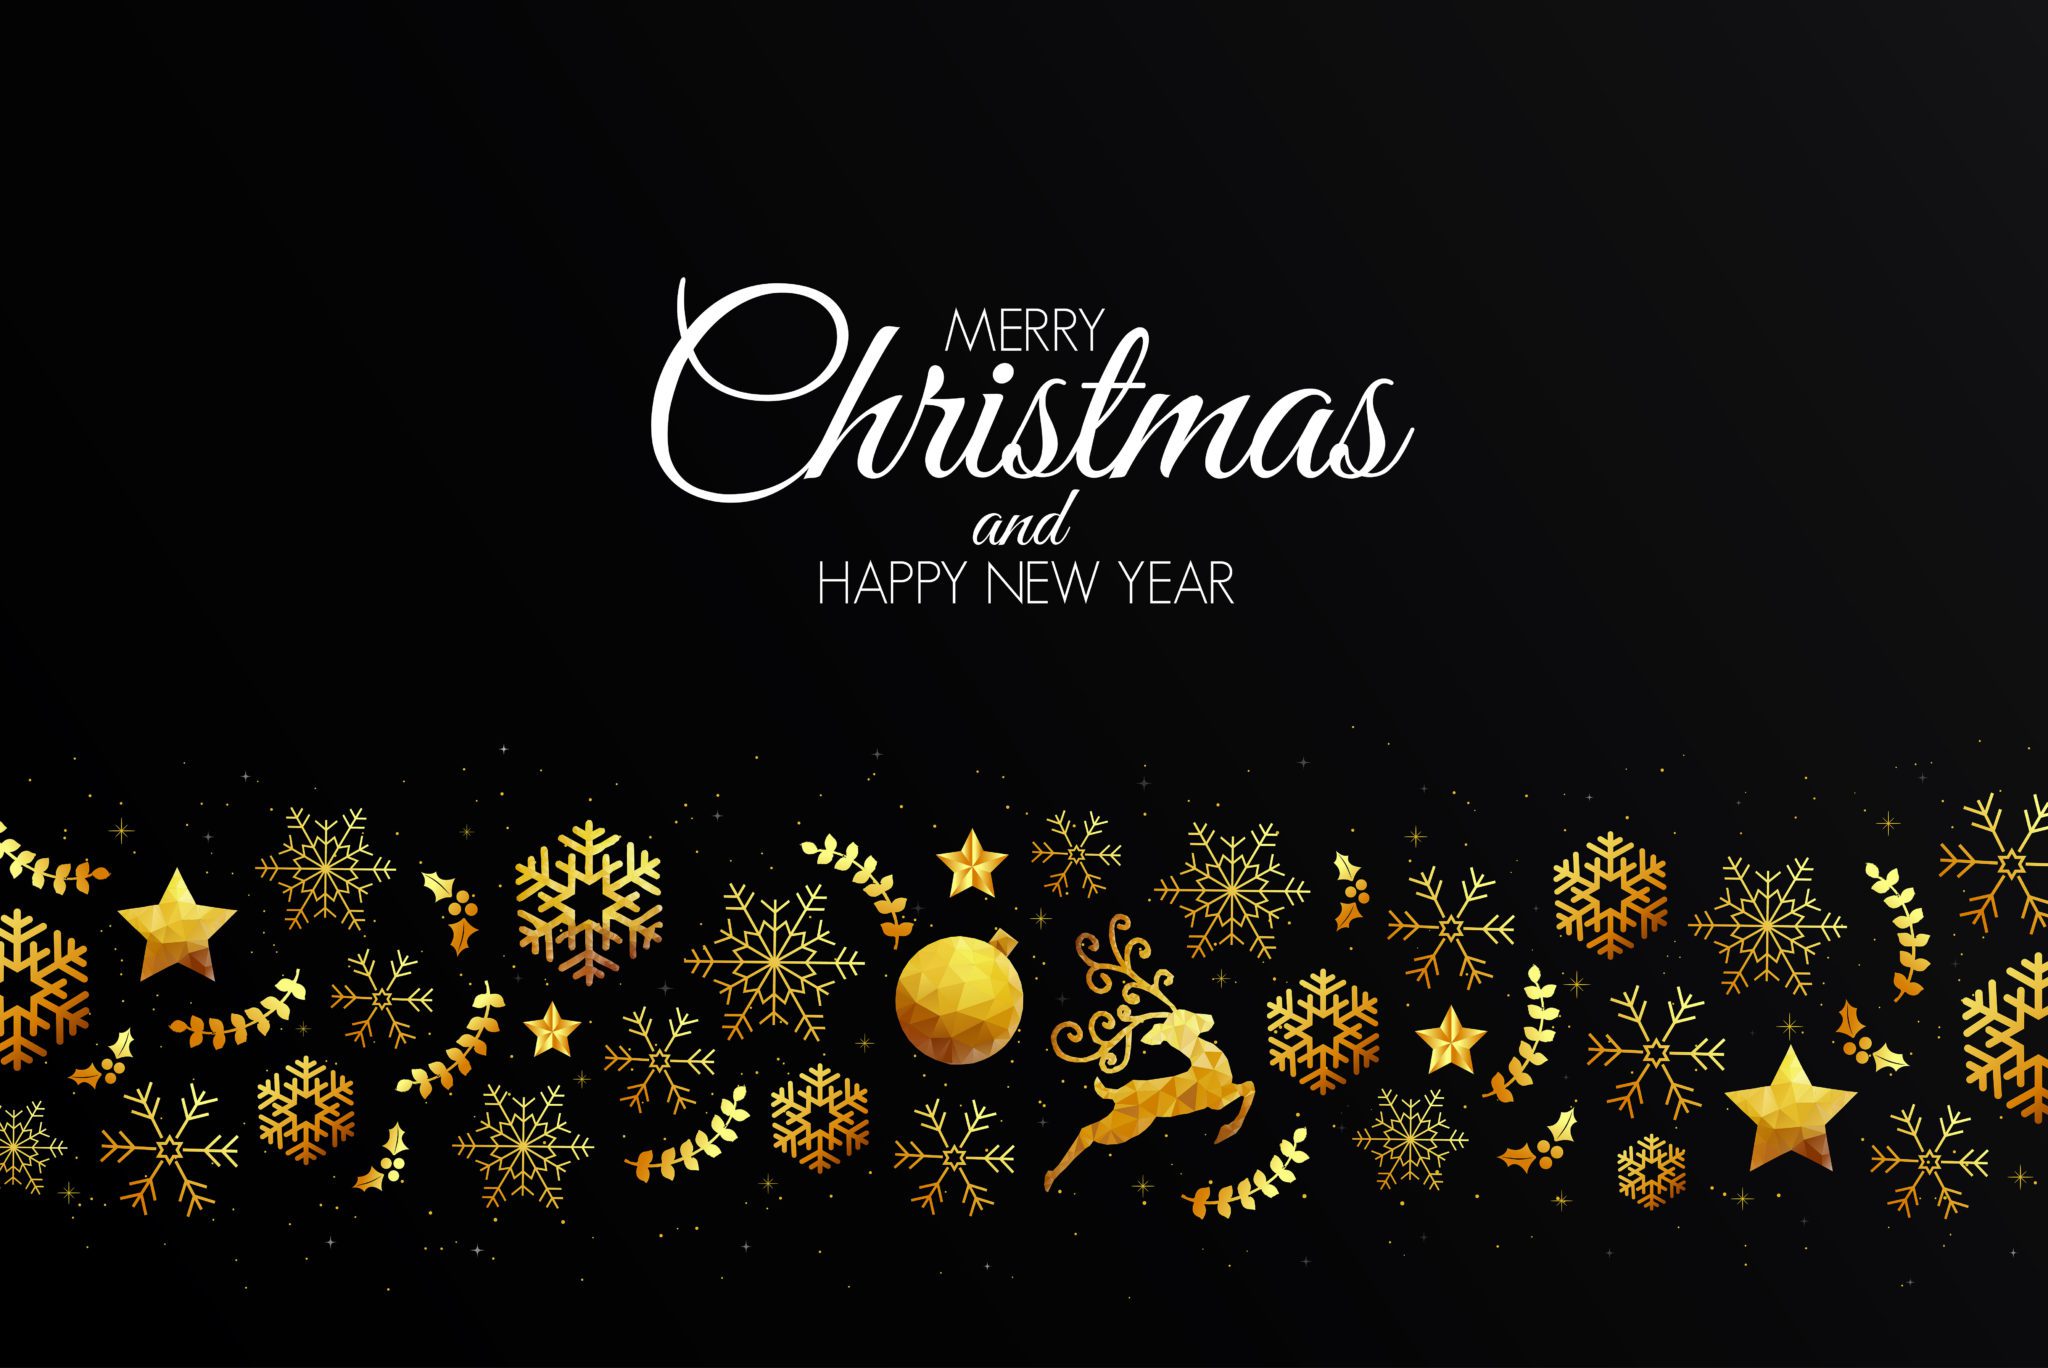 Low Poly Golden Christmas Decorations Christmas Card Template for Pages